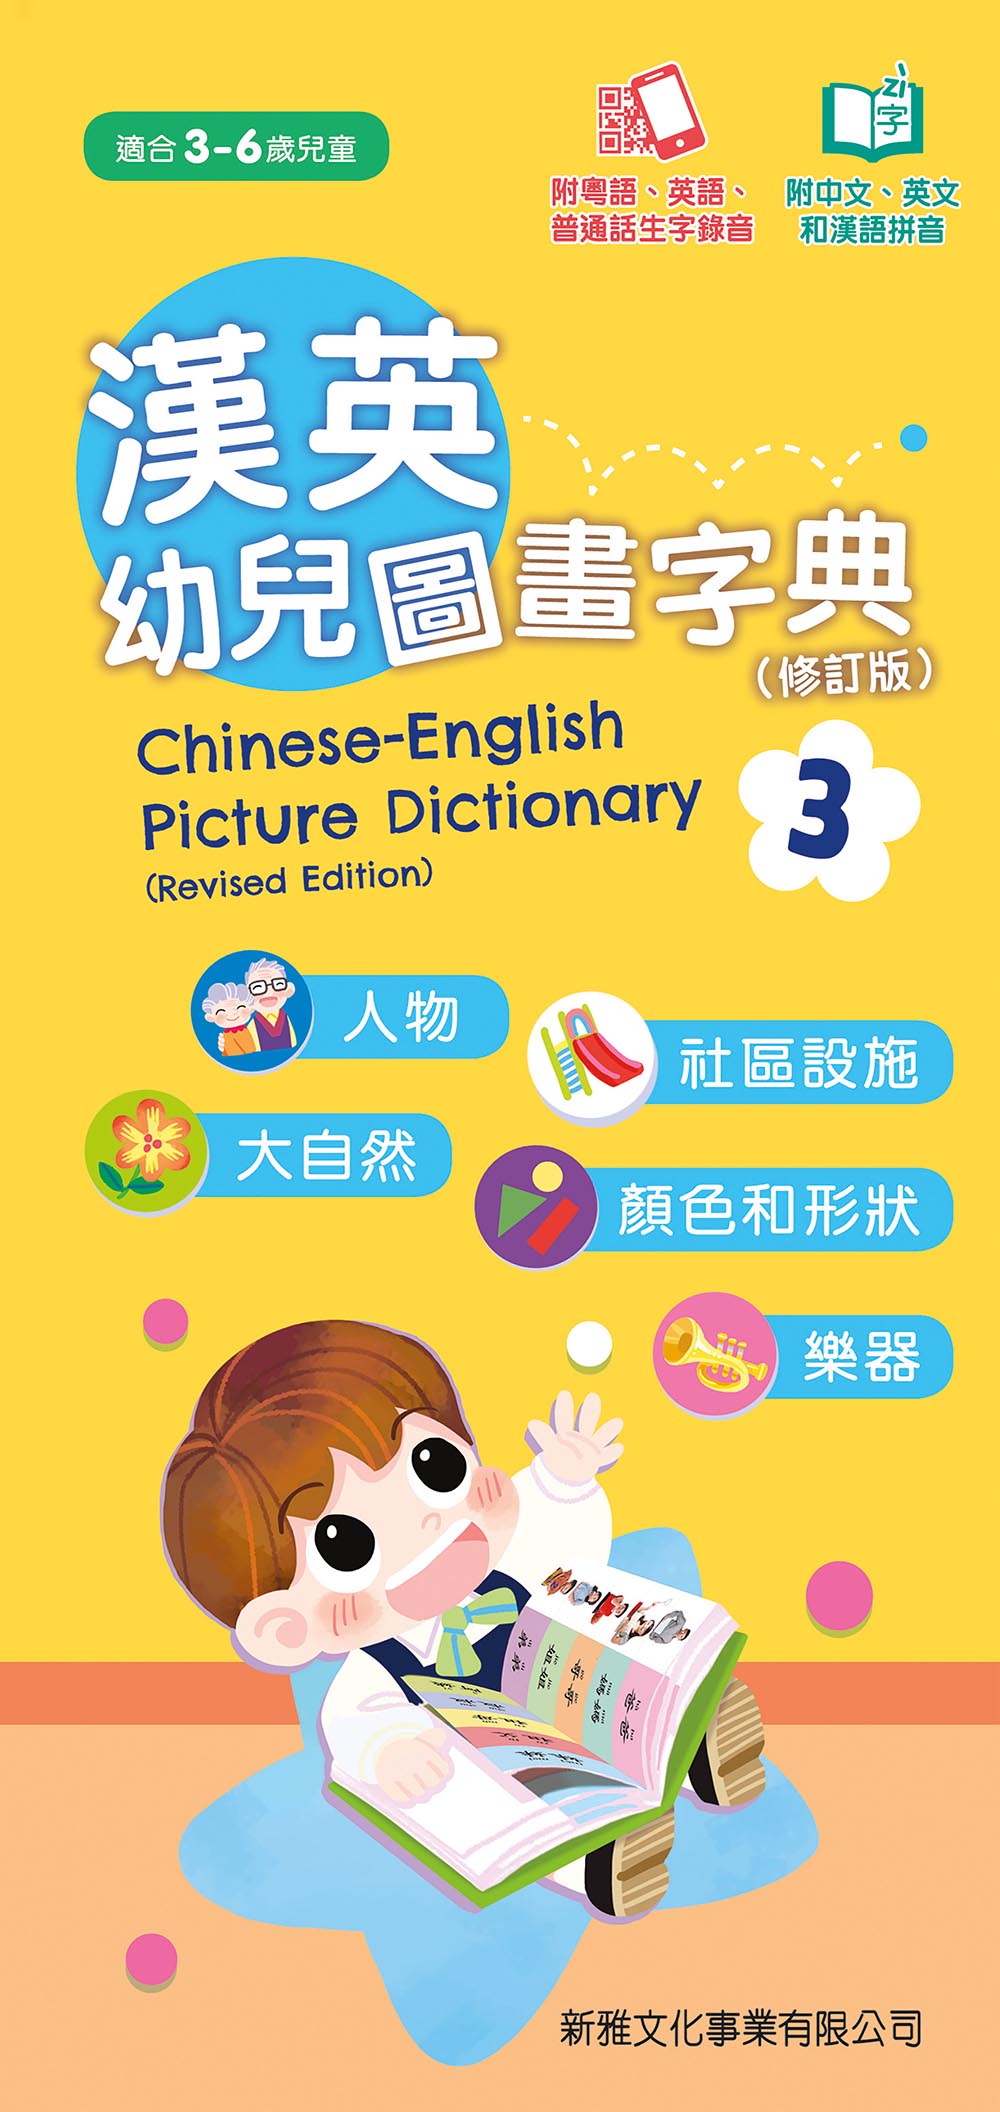 Chinese-English Picture Dictionary for Children #3 (Audio in Cantonese, Mandarin, and English - QR Code) • 漢英幼兒圖畫字典3 (修訂版)  (QR Code)